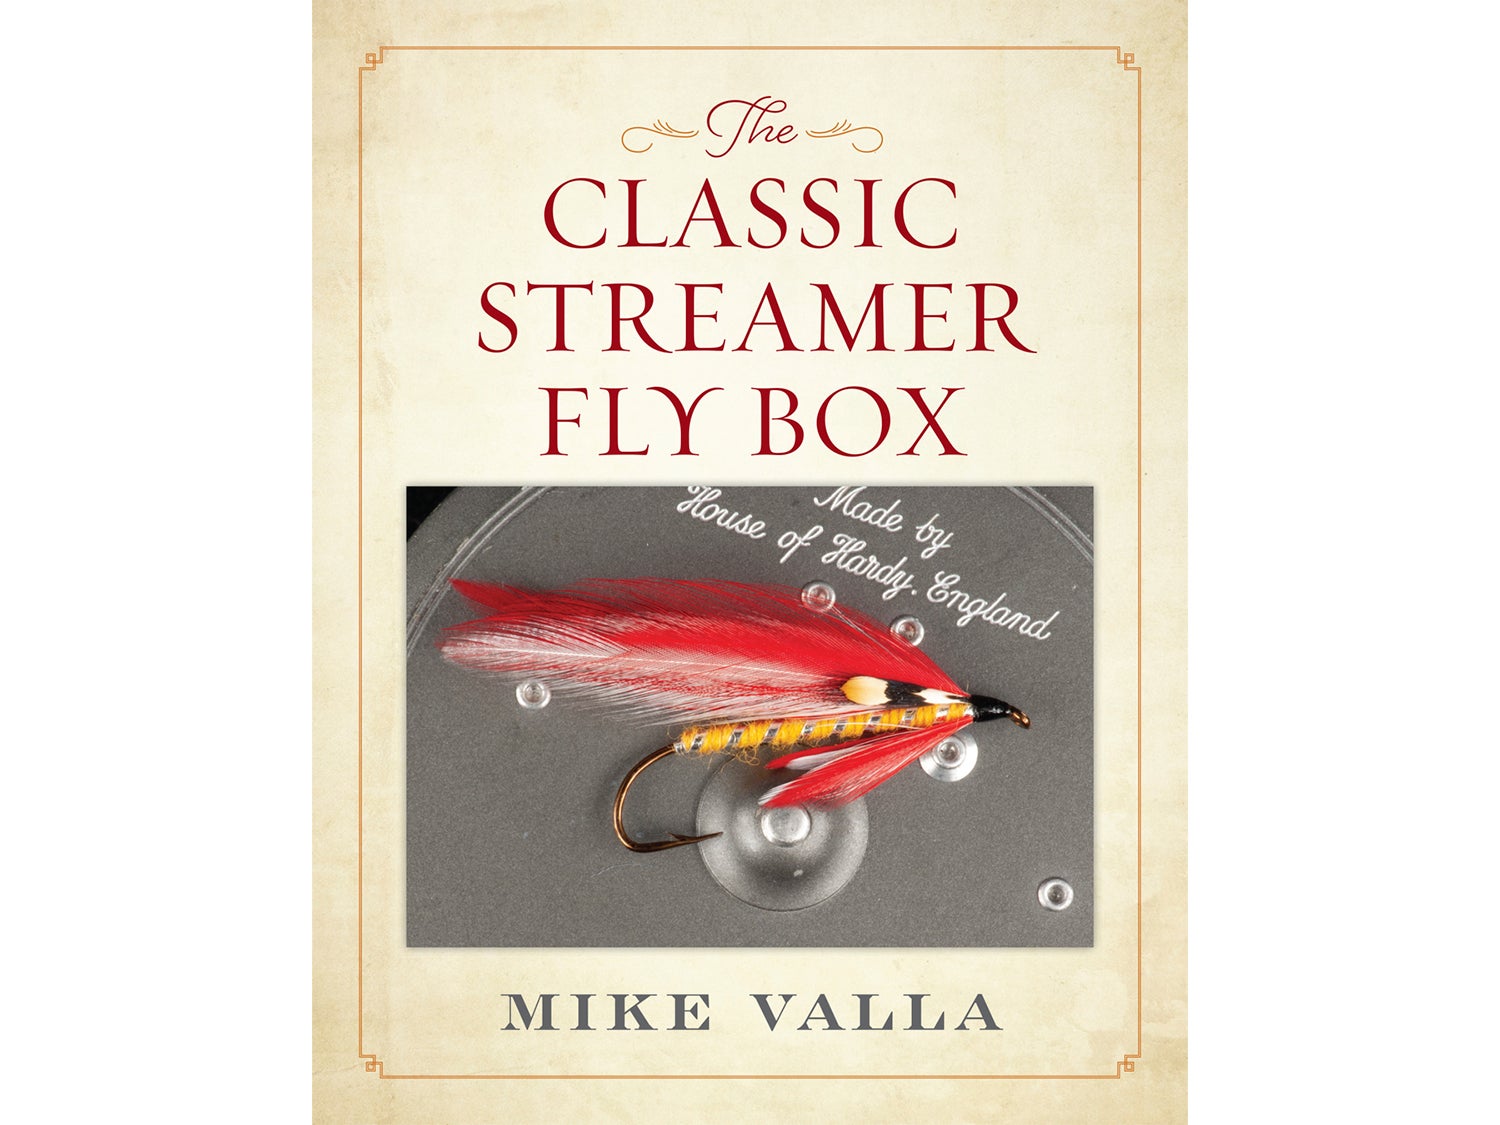 Mike Valla’s The Classic Streamer Fly Box.